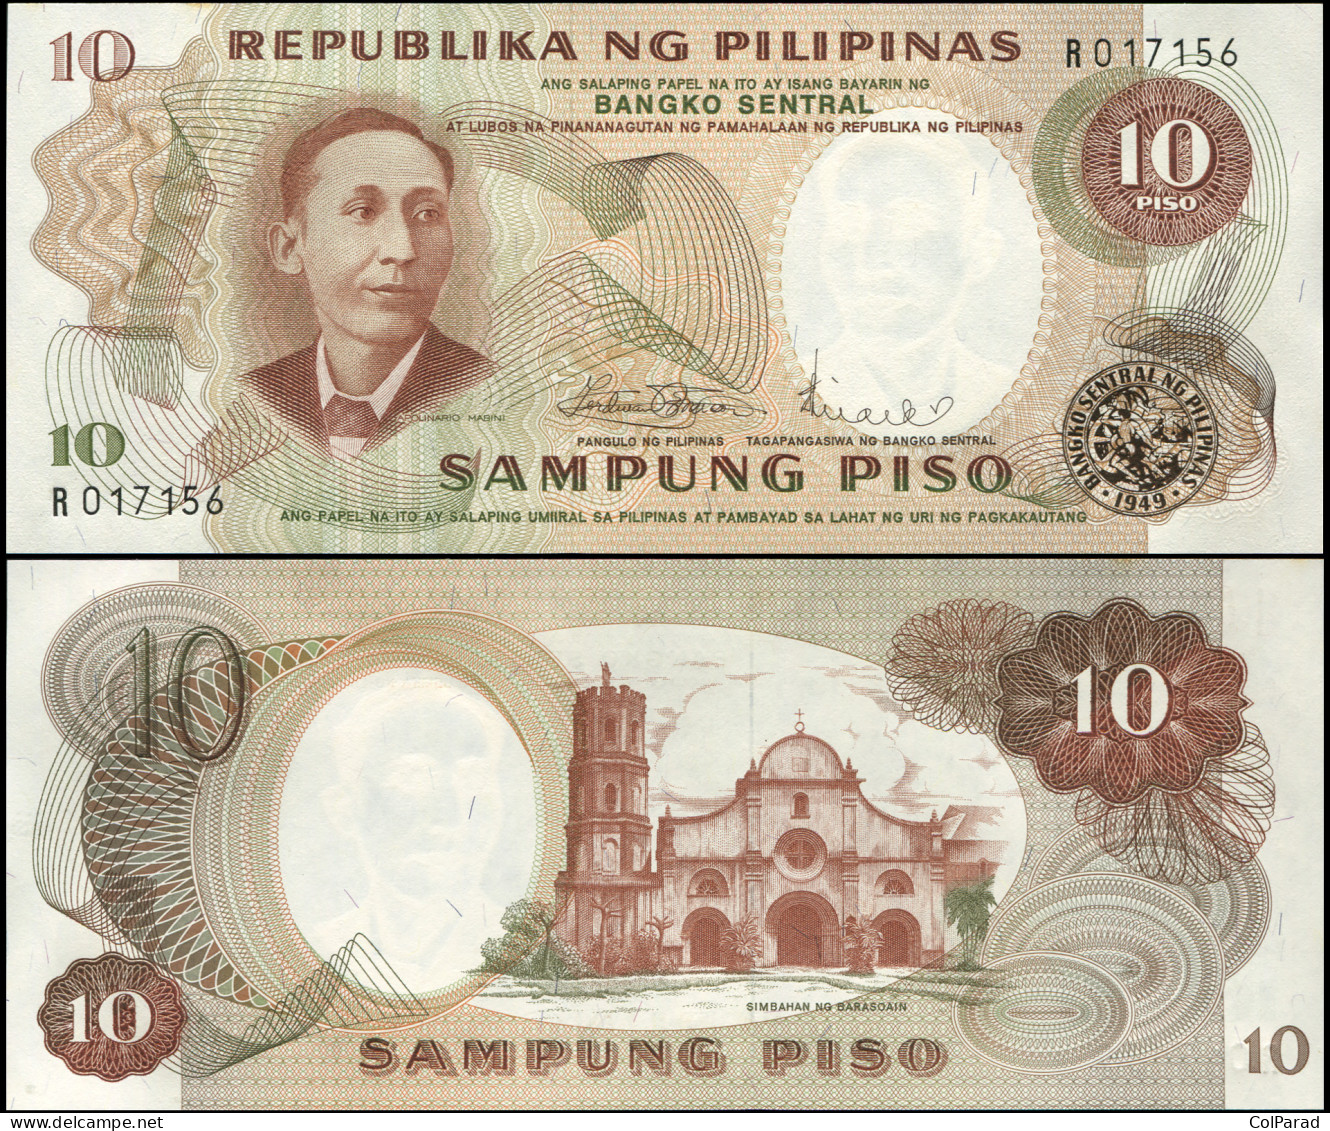 PHILIPPINES 10 PISO - ND (1970) - Paper Unc - P.144b Banknote - Philippines